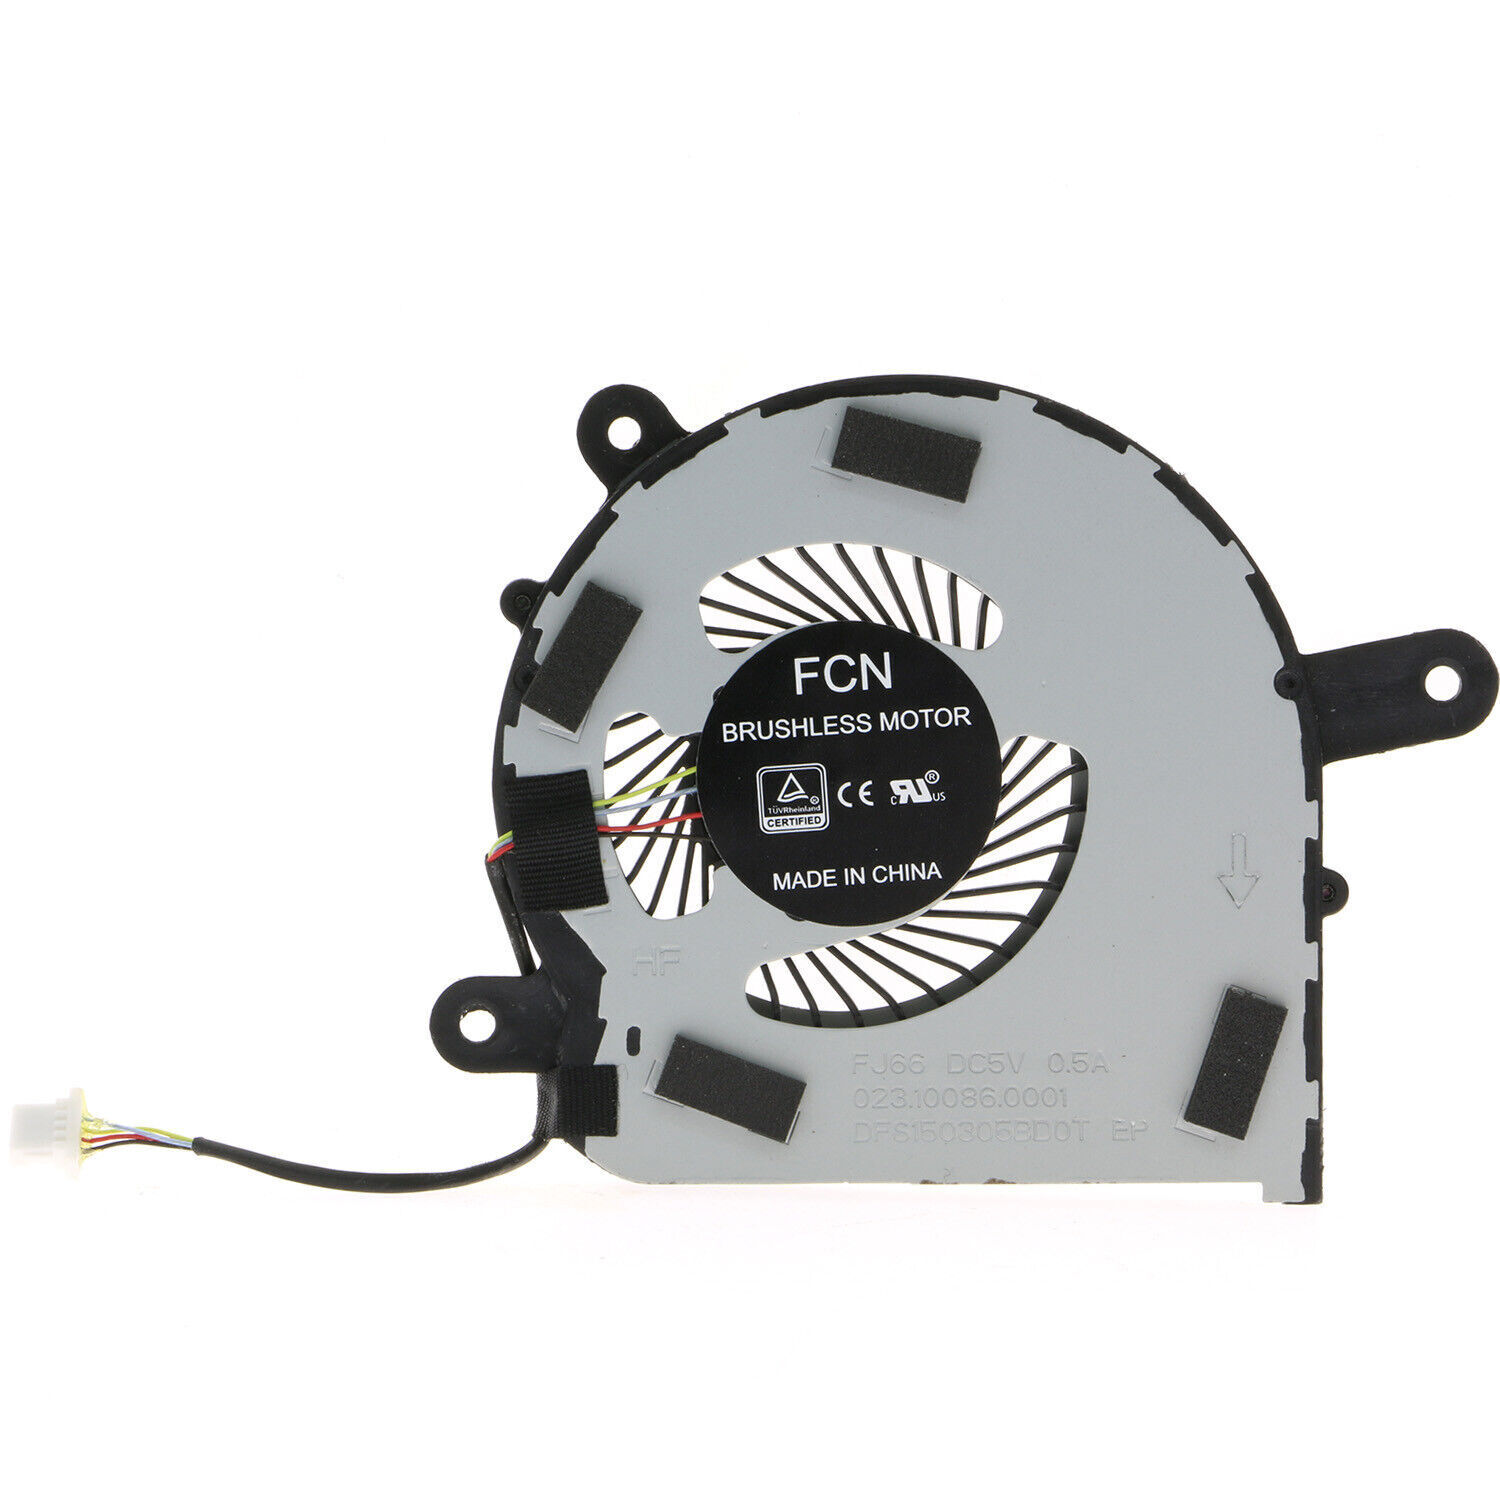 New CPU FAN DC12V 0.7A For HP 800 G3 800 G4 600 G4 400 G4 405 G4 914266-001